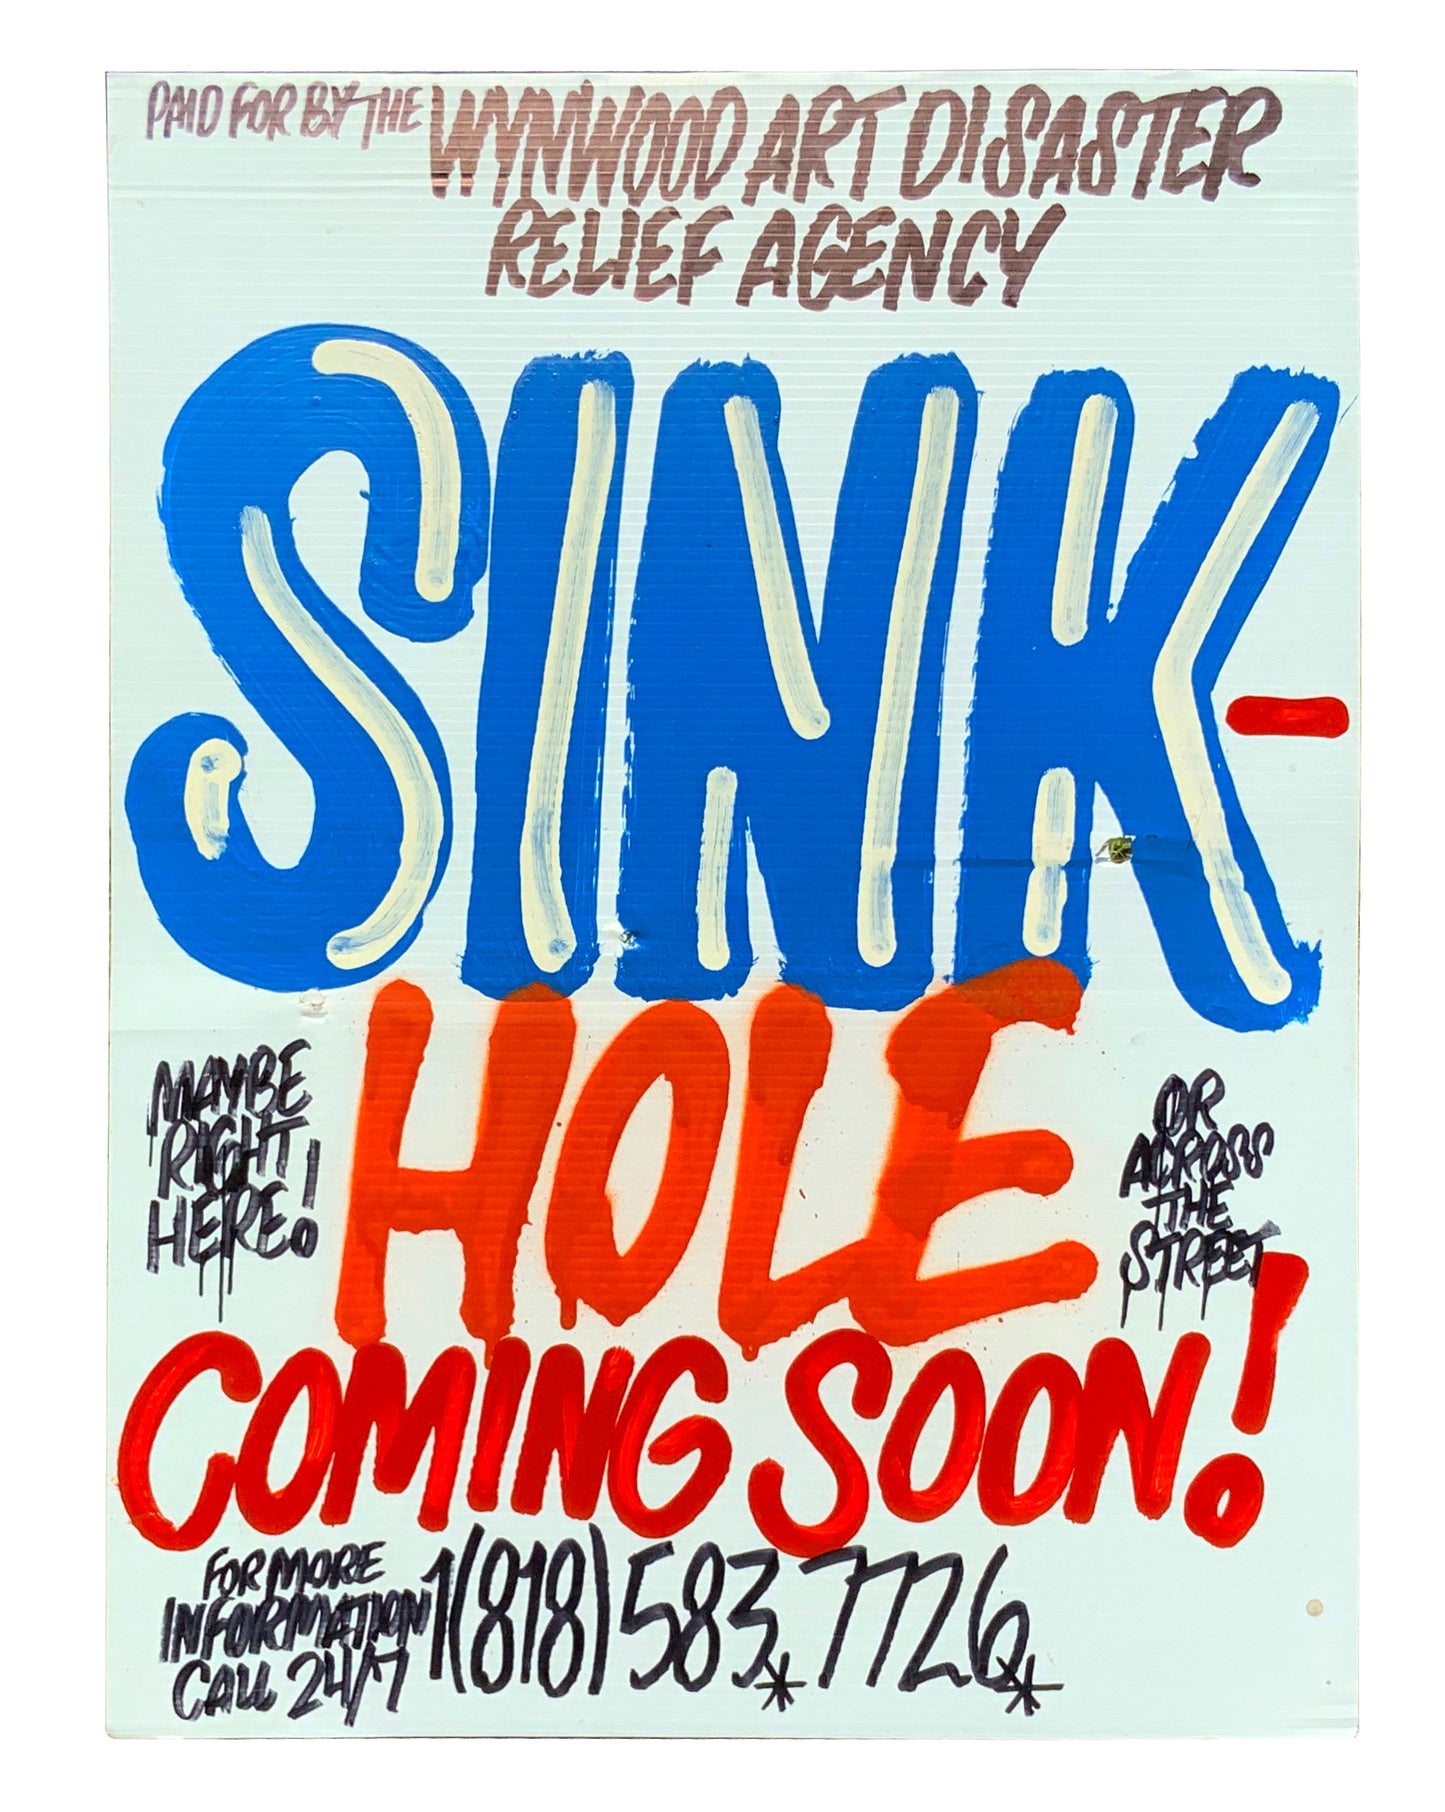 "SINK-HOLE COMING SOON!" - By CASH4 - 2020